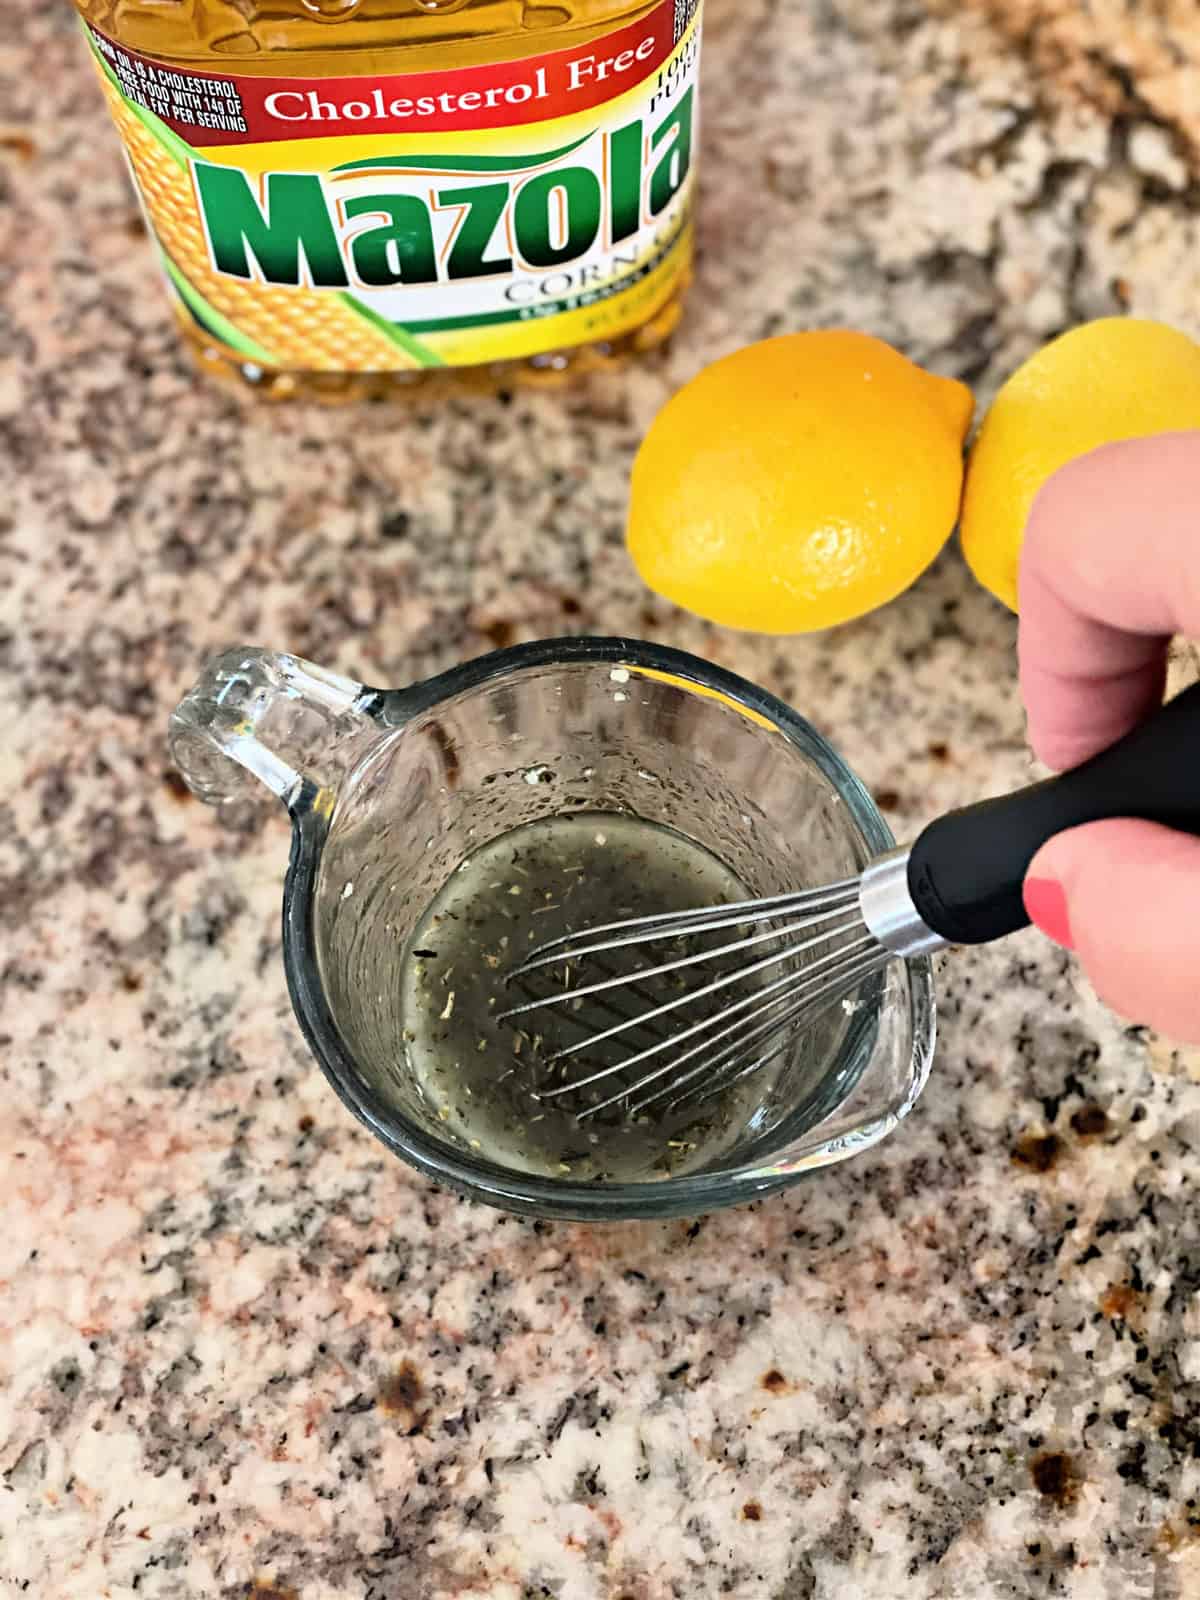 Whisking marinade in a glass measuring cup.